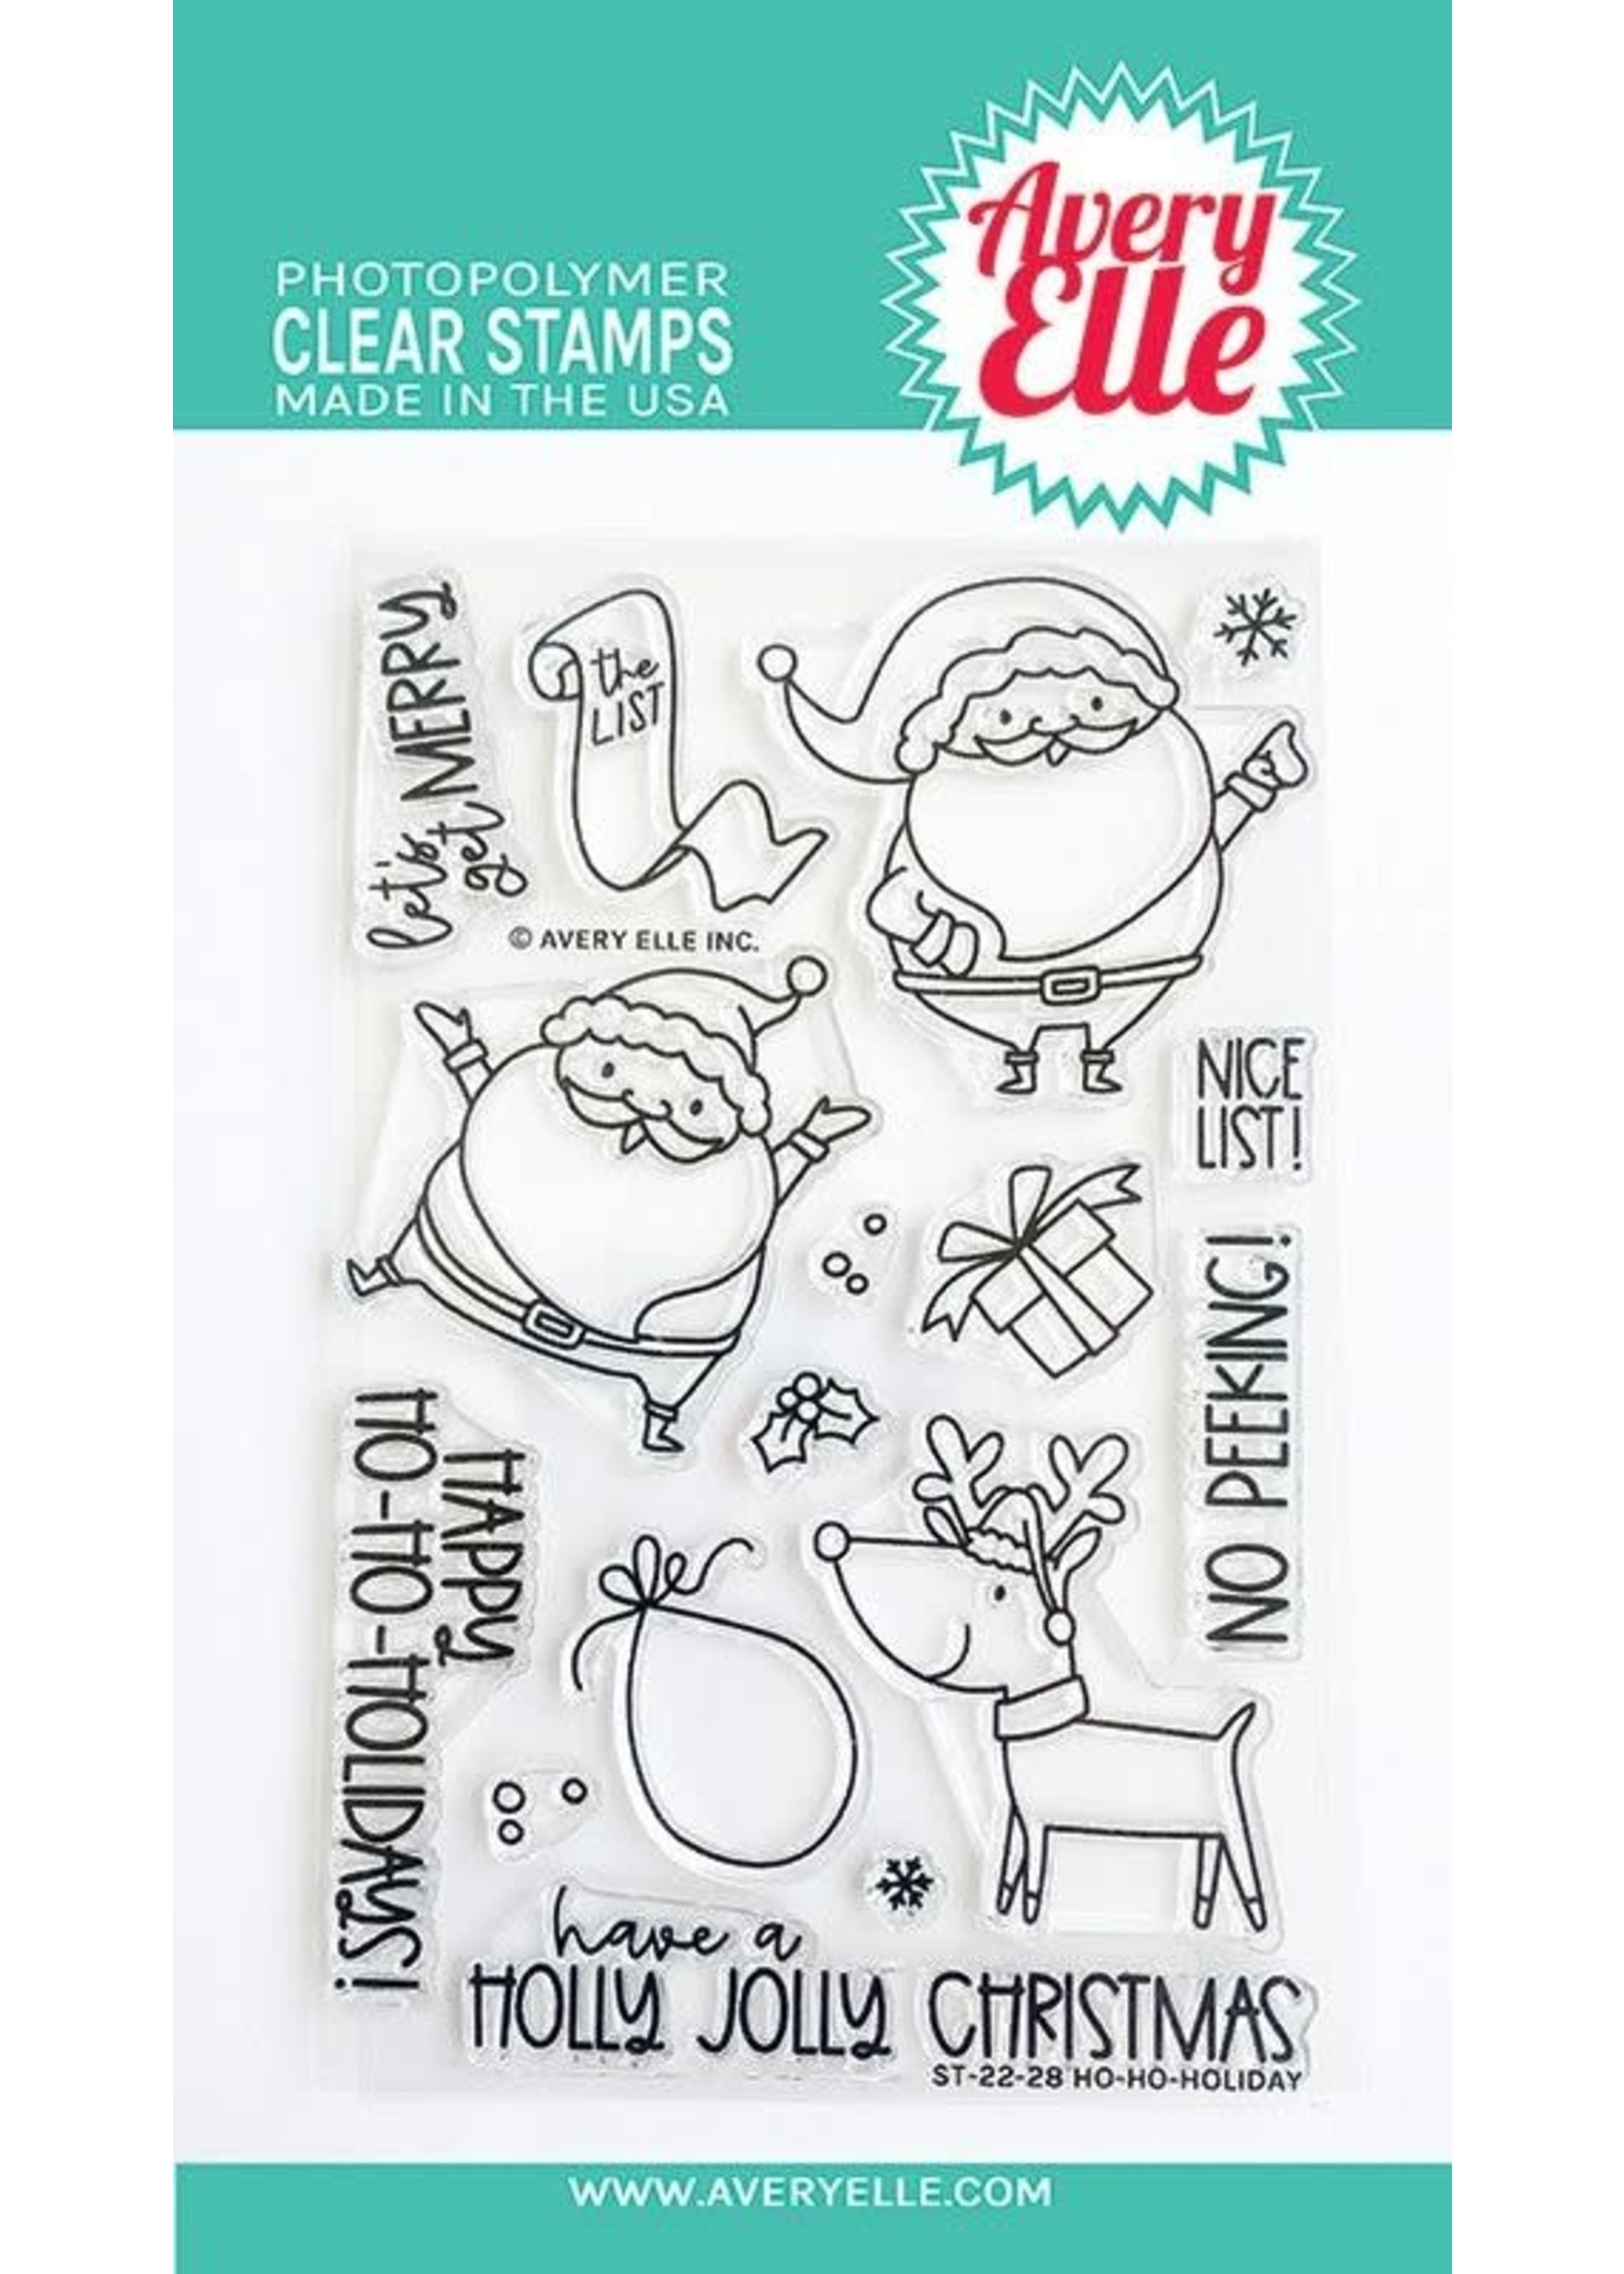 AVERY ELLE INC. Ho-Ho-Holidays Clear Stamp & Die